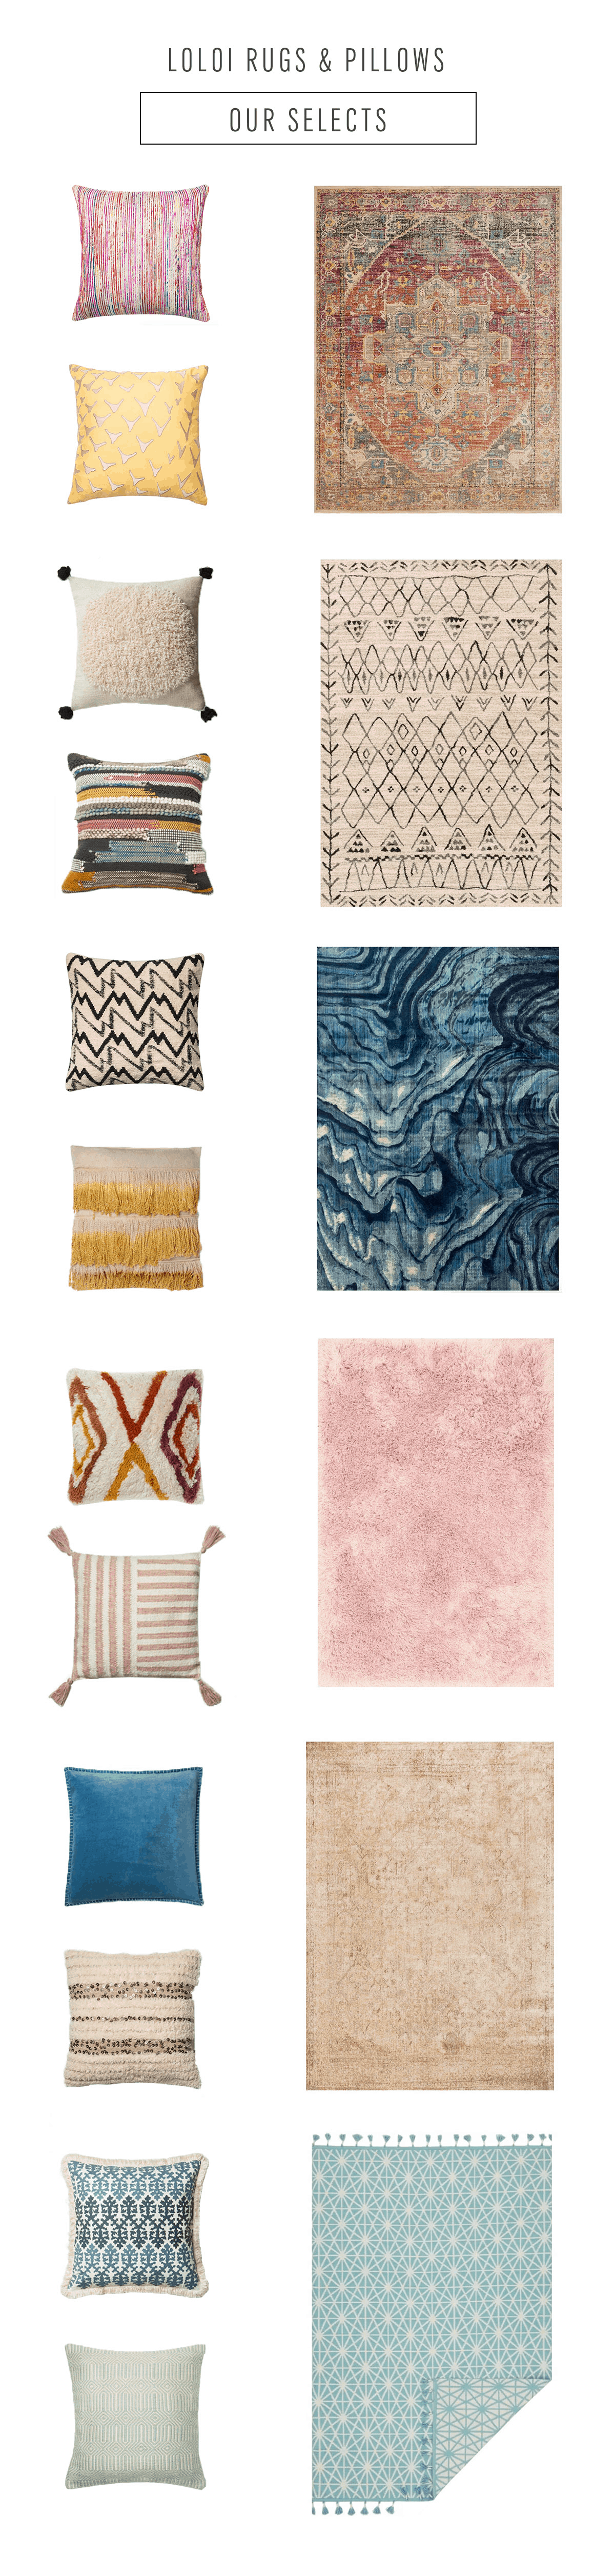 Our favorite Loloi Rugs & PIllows this Fall by top Houston lifestyle blogger Ashley Rose of Sugar & Cloth